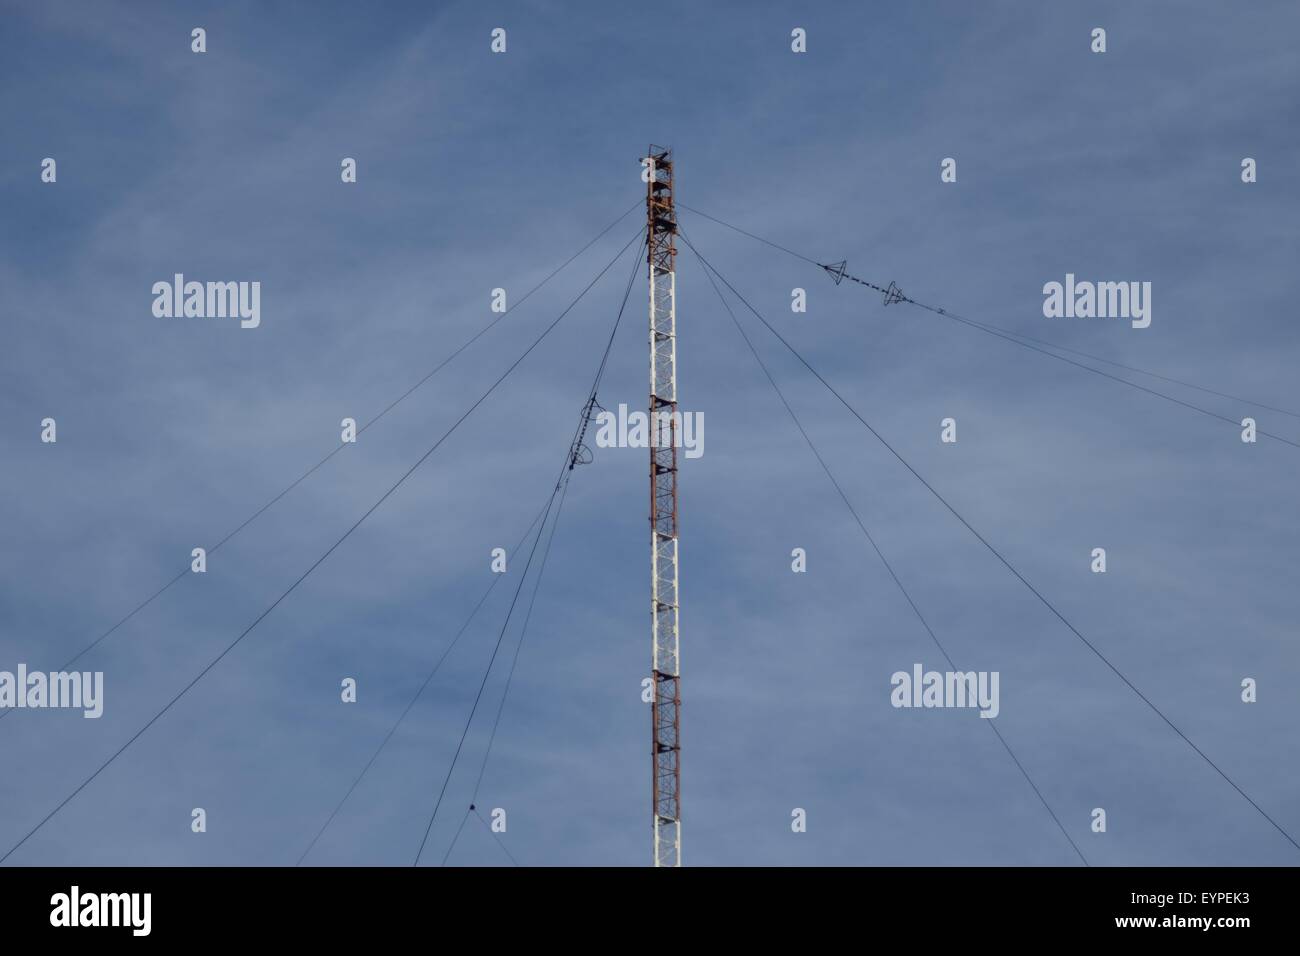 Long-wave radio-transmitting towers. Telecommunication tower with steel ...